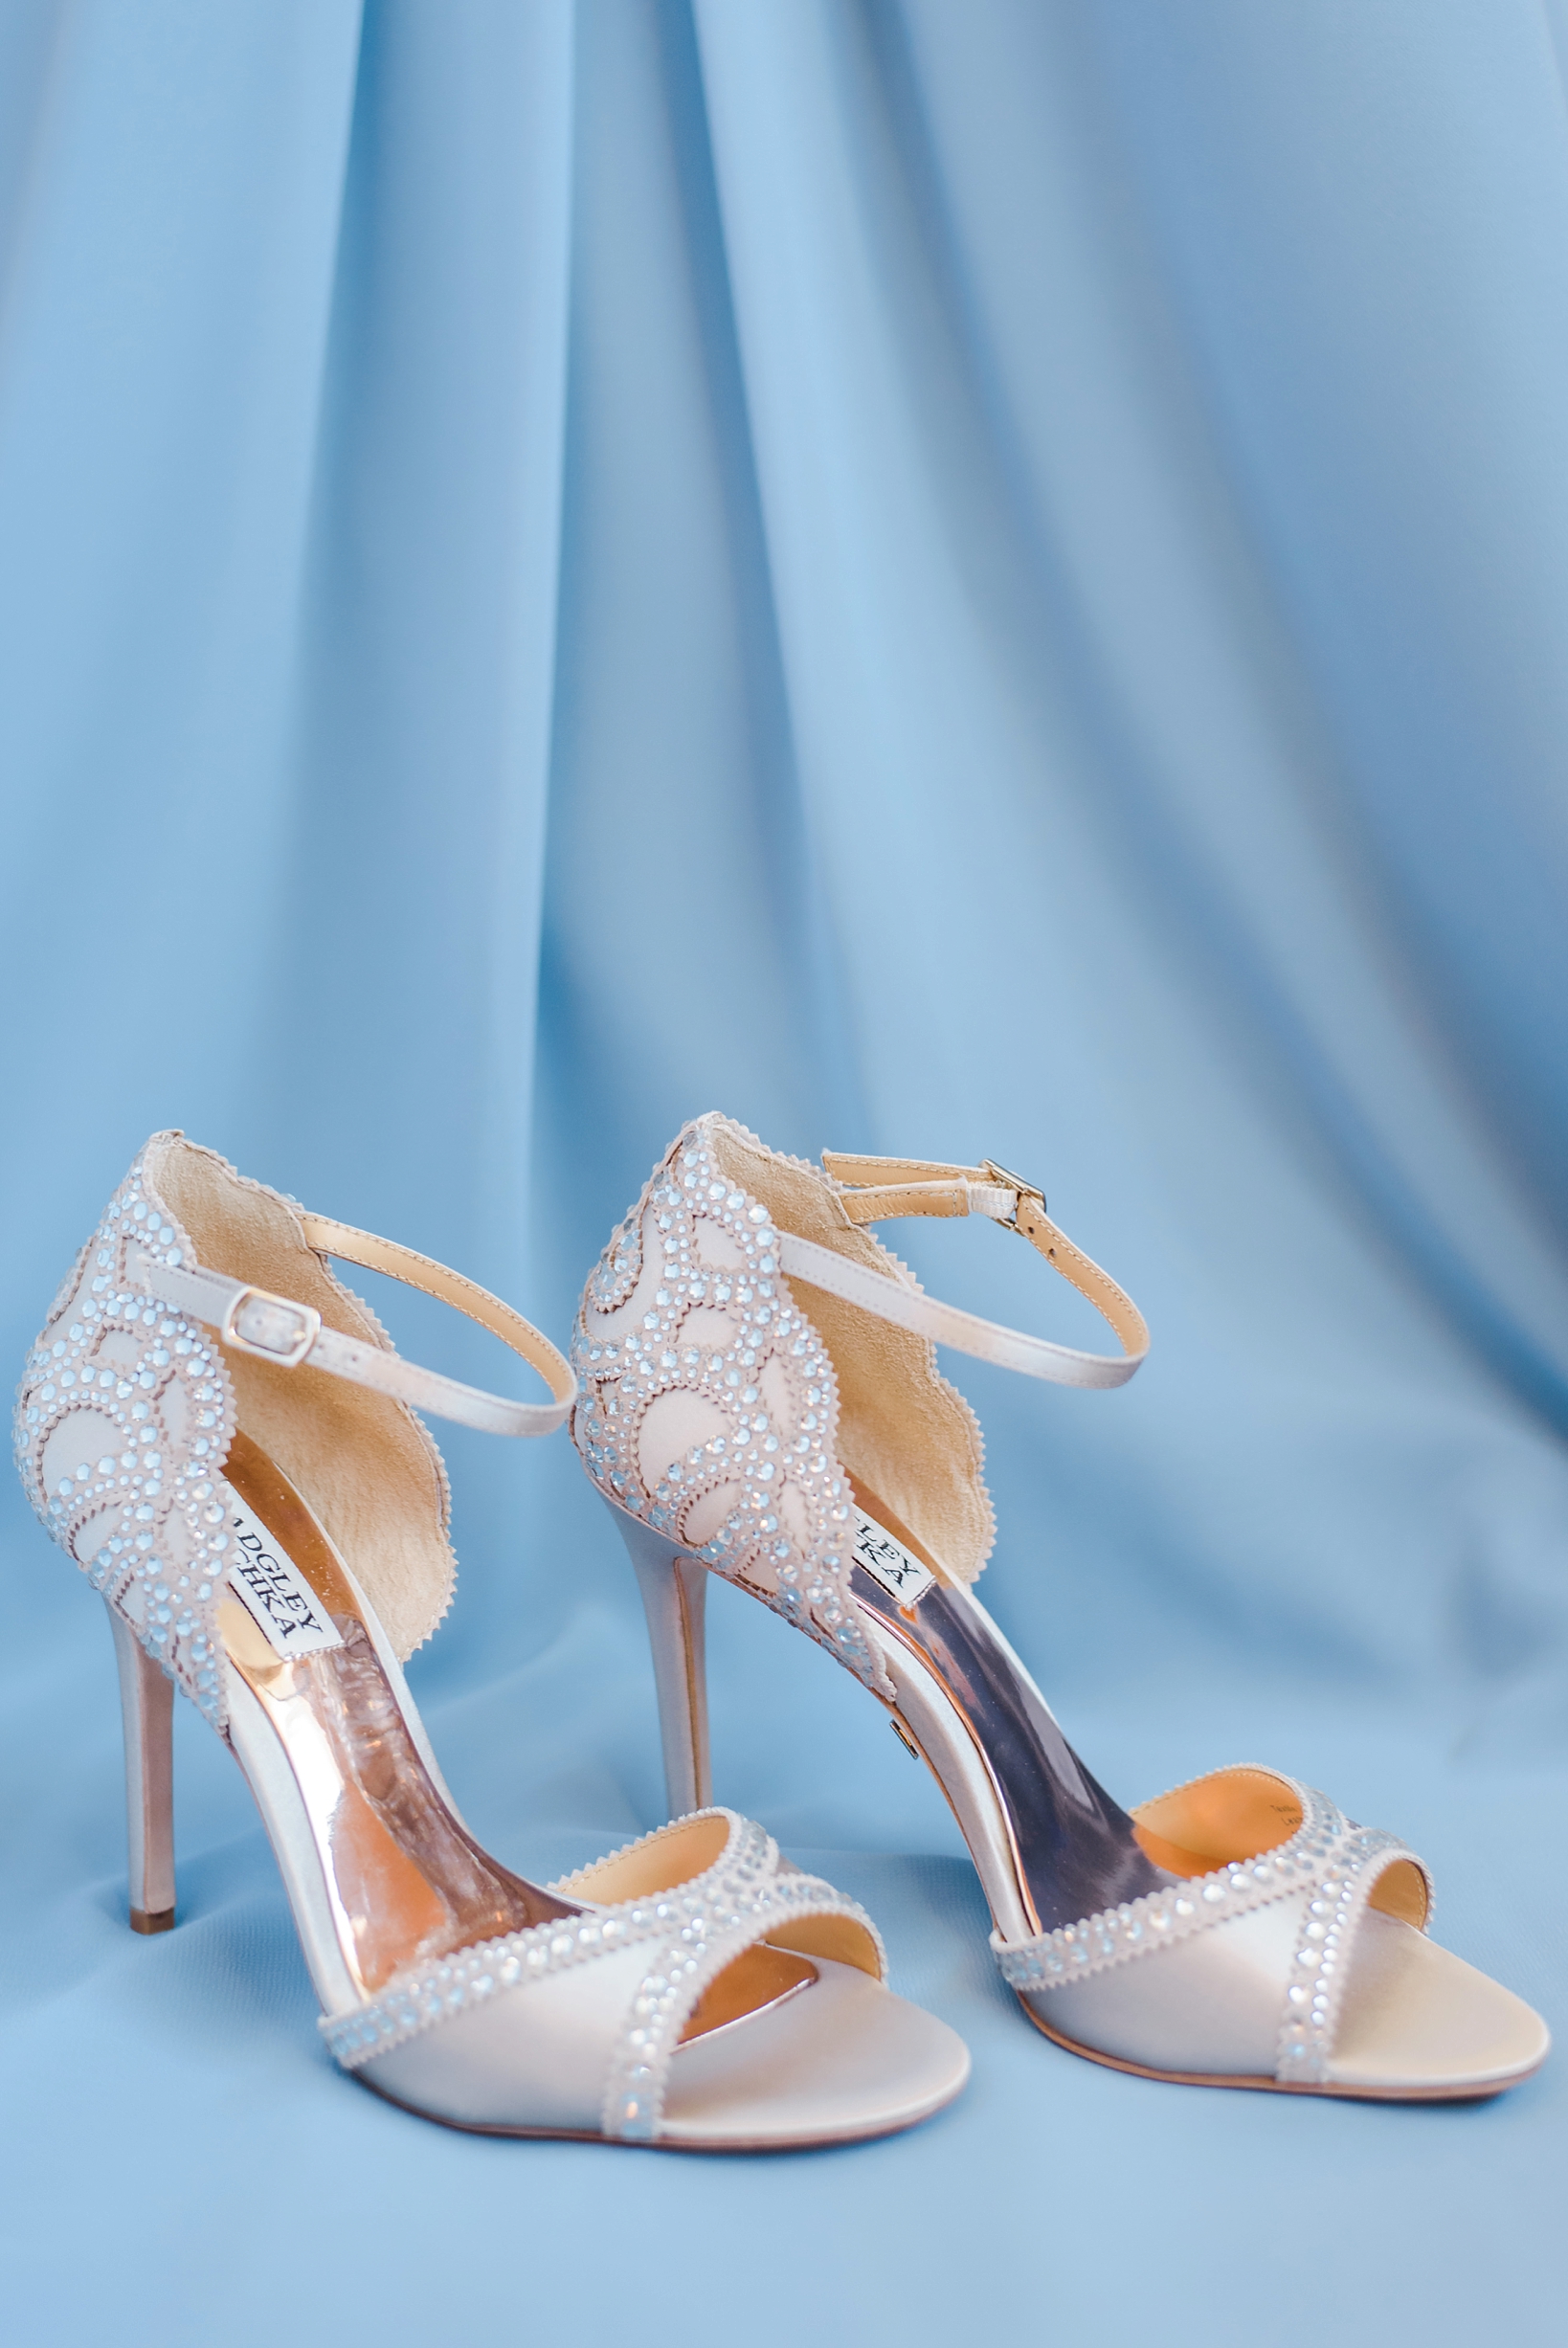 Rhinestone strapped bridal heels against the blue of a bridesmaids dress